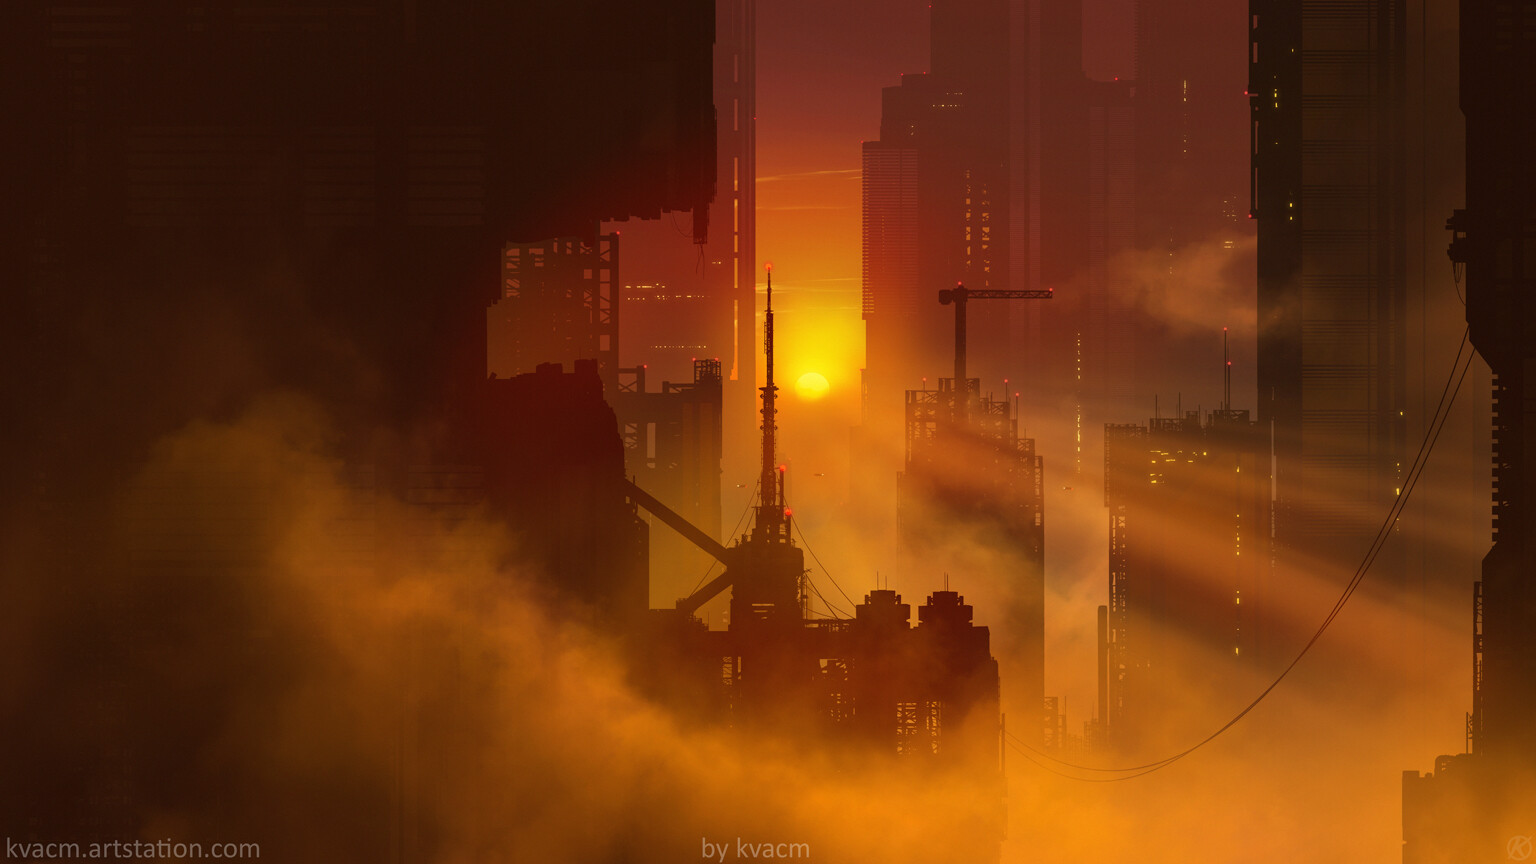 Dystopian Towers